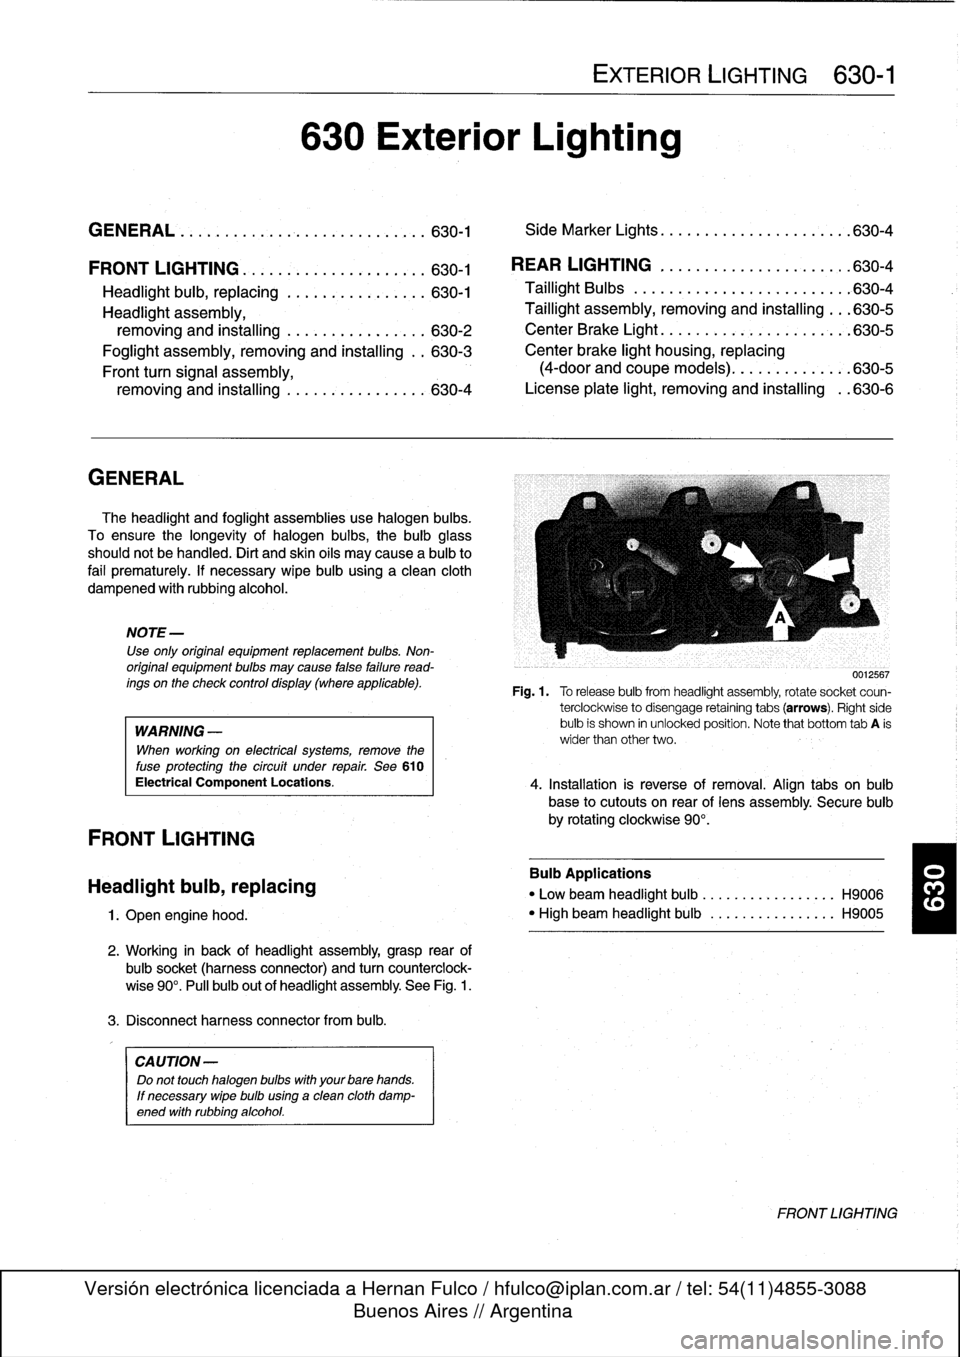 BMW 318i 1997 E36 Workshop Manual 
FRONT
LIGHTING
.
...........
.
....
.
.
.
.
630-1

Headlight
buib,
replacing
............
.
.
.
.
630-1
Headlight
assembly,

removing
and
installing
.......
.
....
.
.
.
.
630-2

Foglight
assembly,
r